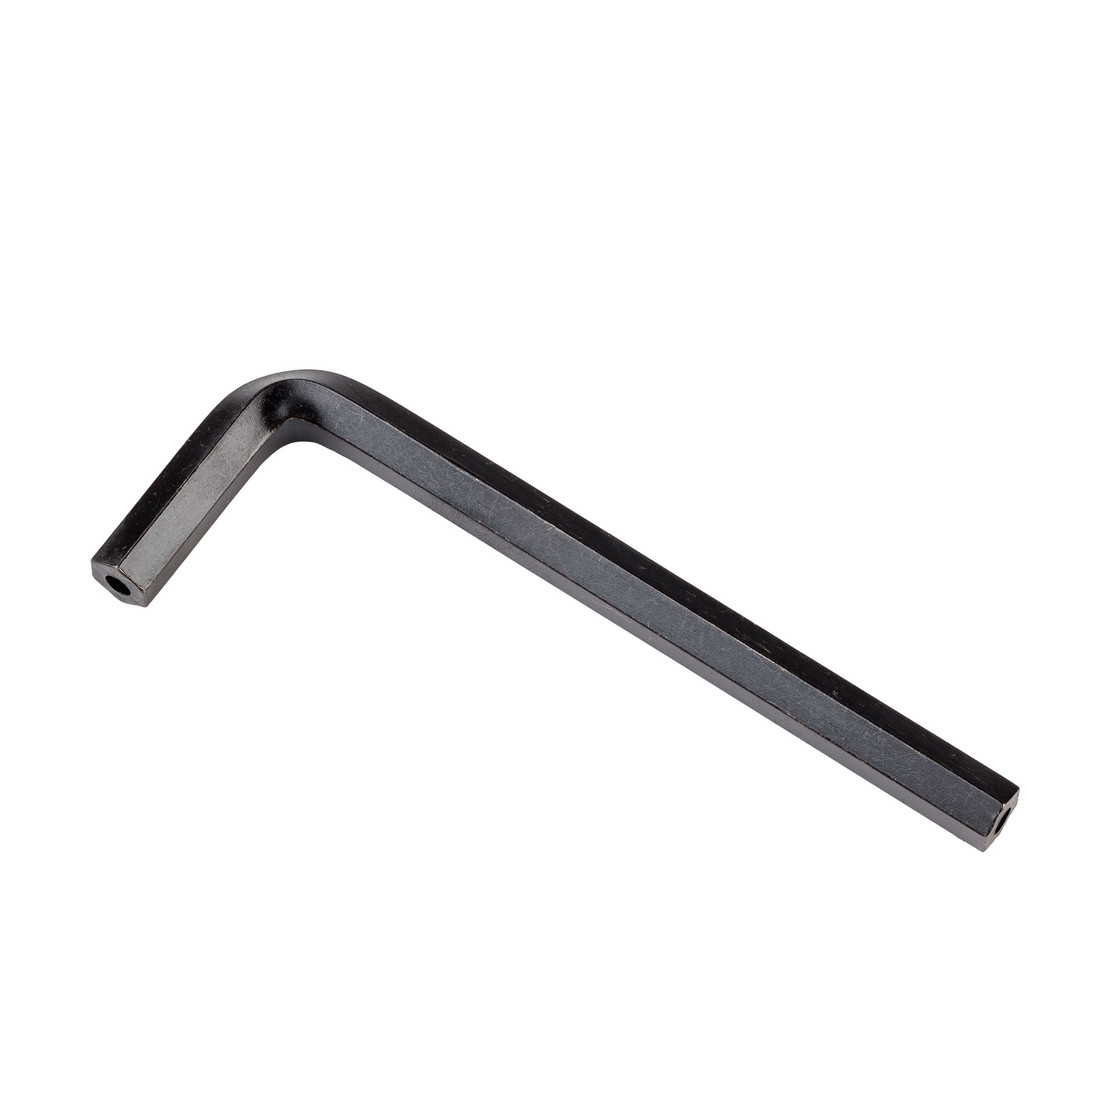 Hex Tool (SH-41) for Clevis Shackle Pin